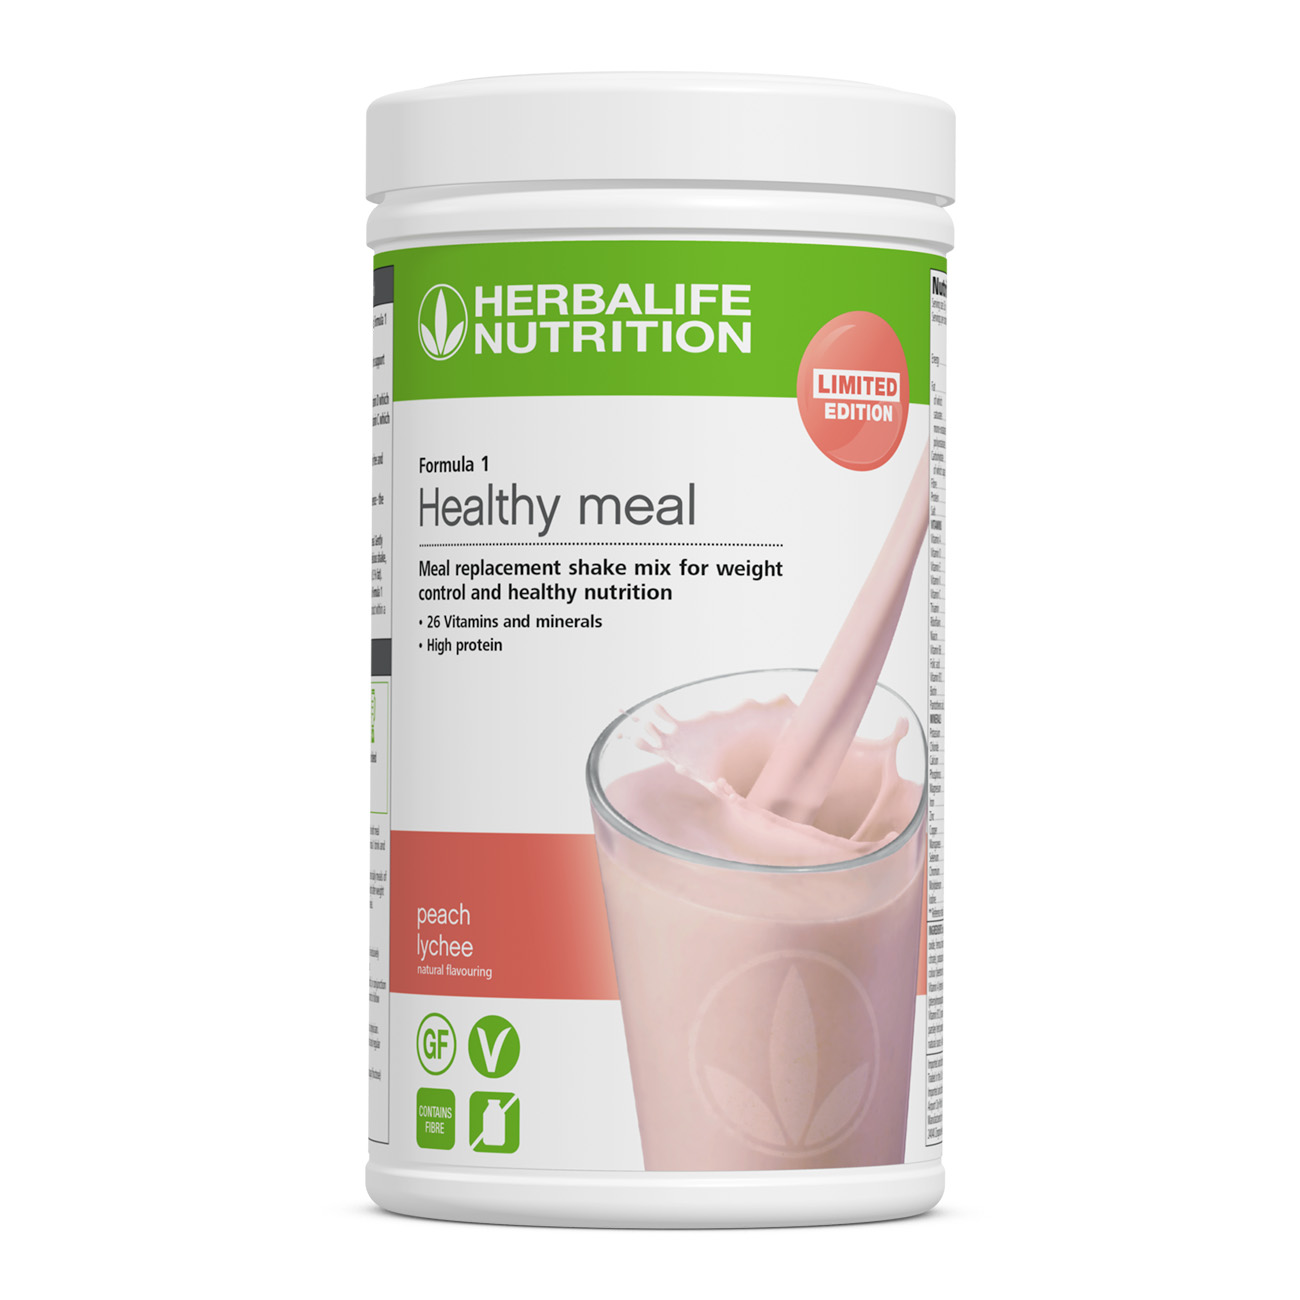 Limited edition F1 Peach Lychee flavour. It is a healthy meal replacement shake, high in protein and balanced with vitamins and minerals plus fats.